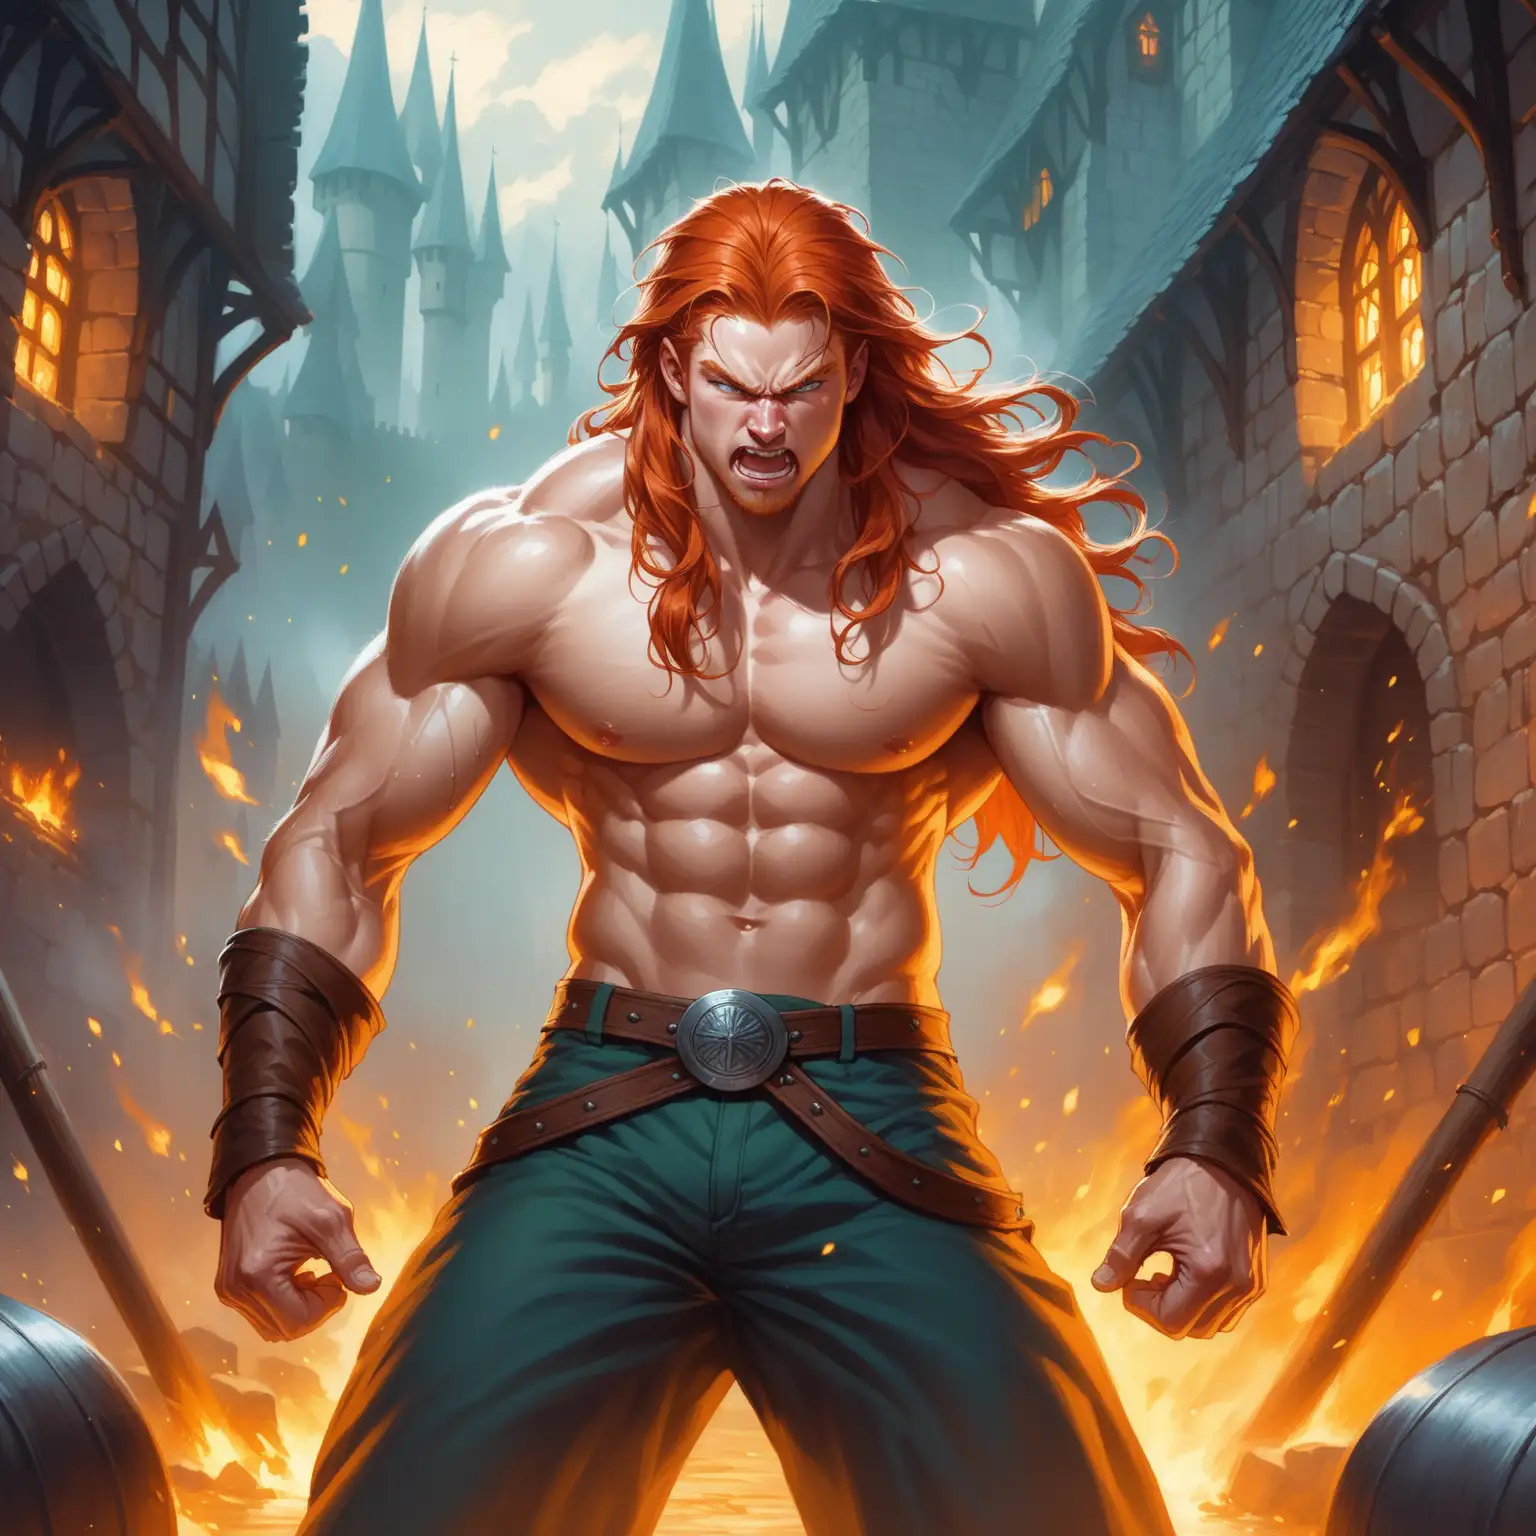 Fierce Muscular Man with Long Ginger Hair in Medieval Fantasy Art